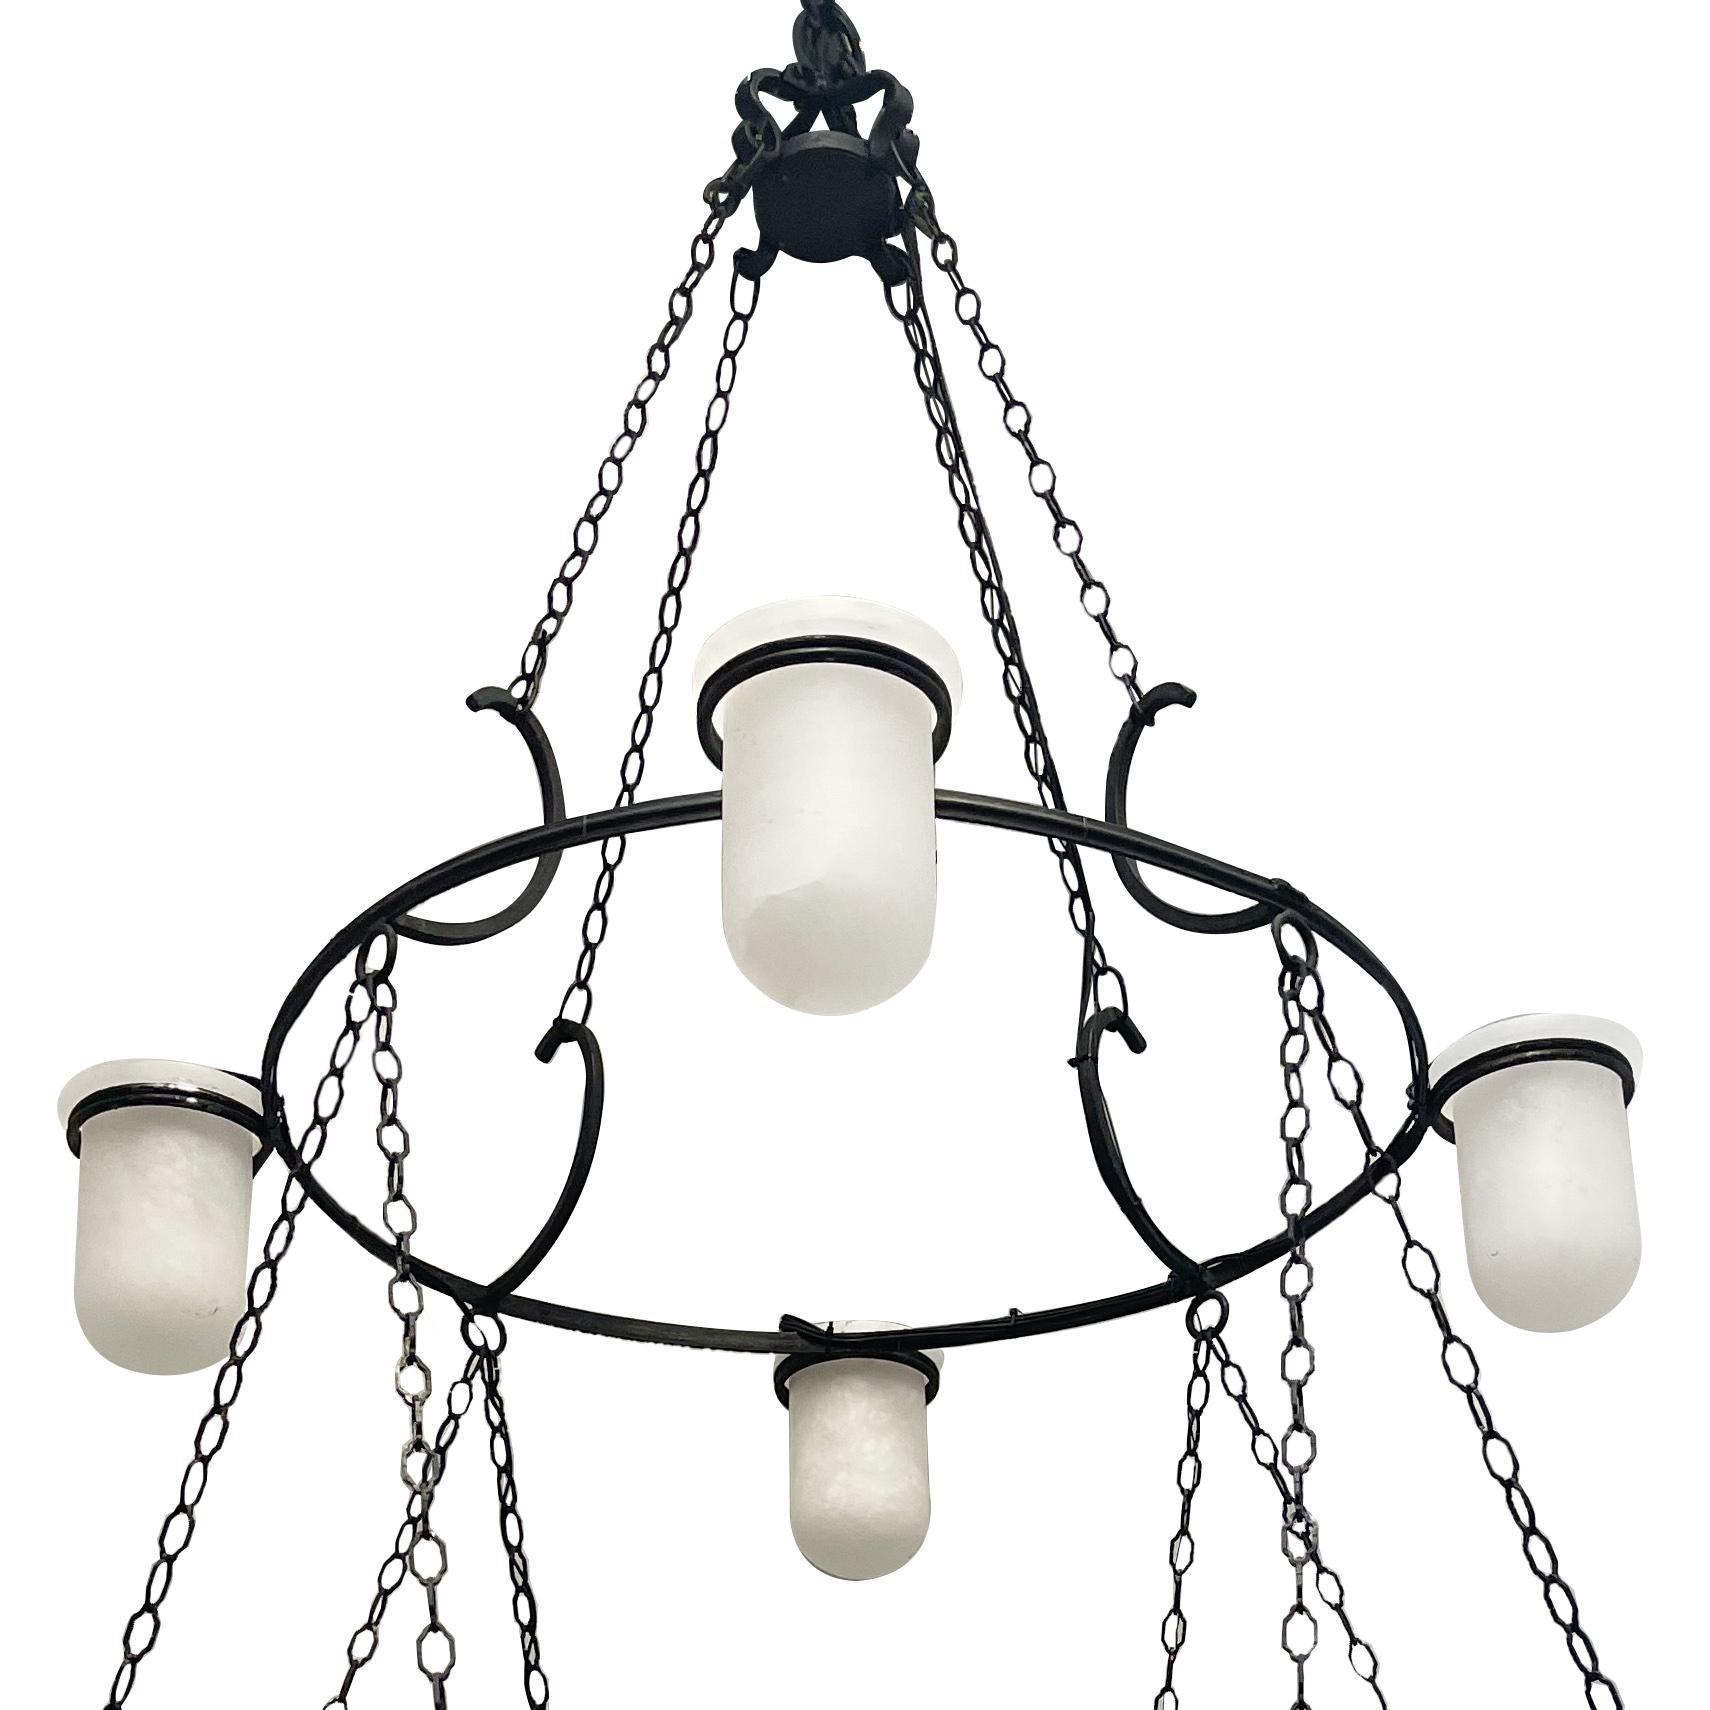 A circa 1950's Italian sixteen light bronze chandelier with carved alabaster insets.

Measurements:
Height: 58